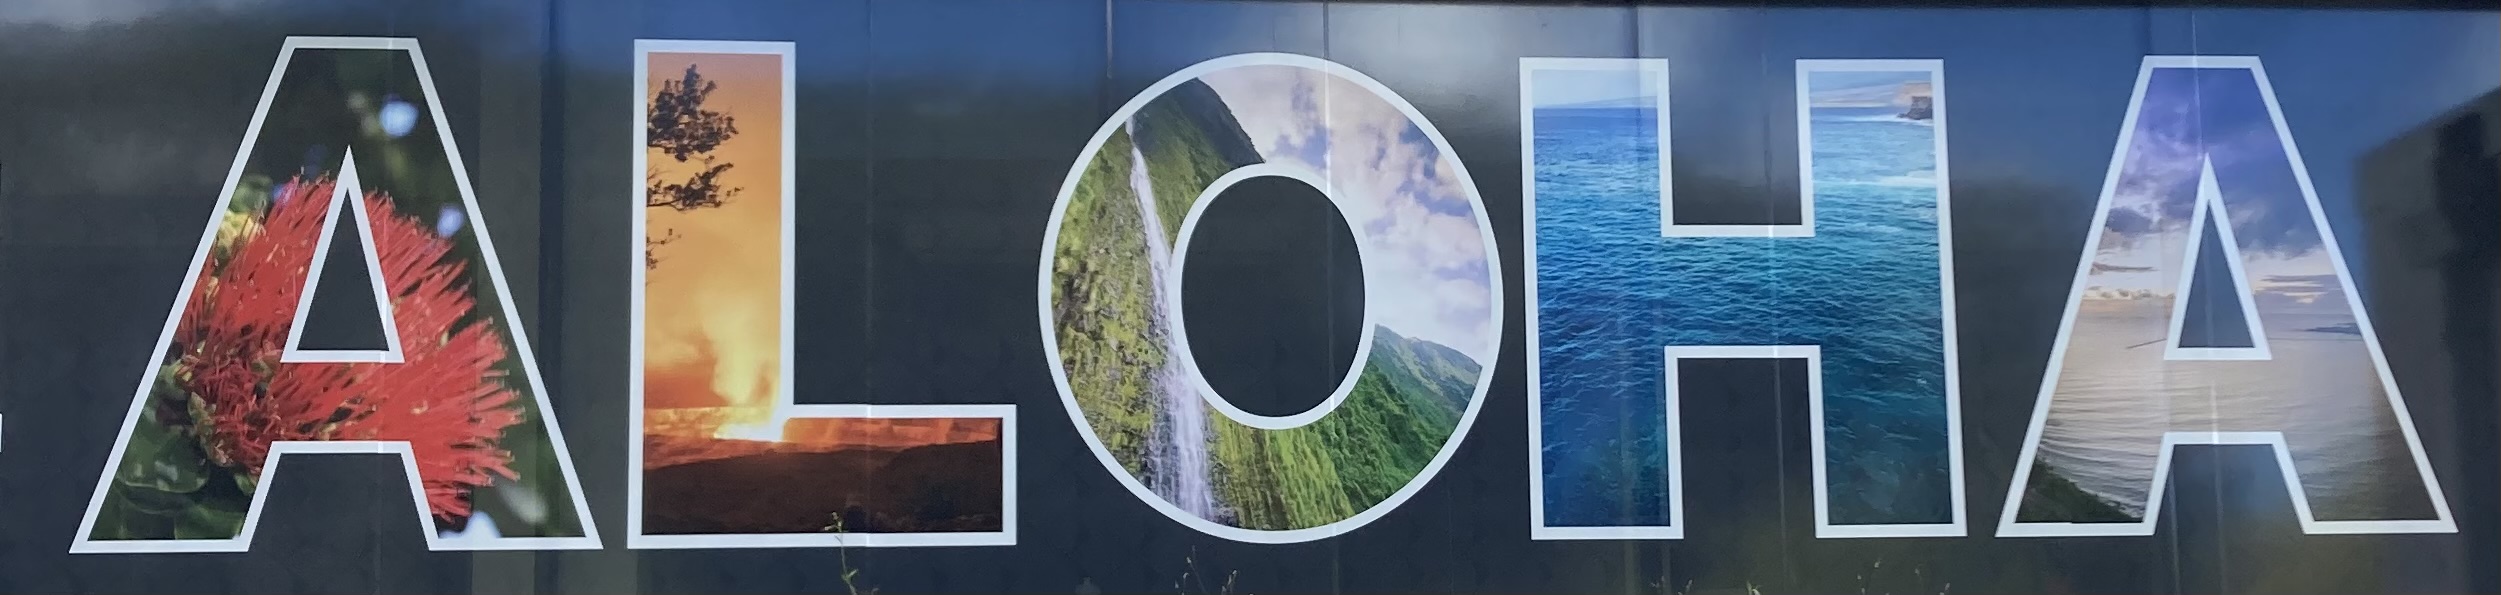 Hawaii scenes of ocean, volcano, and plants fill in large letters of the spelled word ALOHA